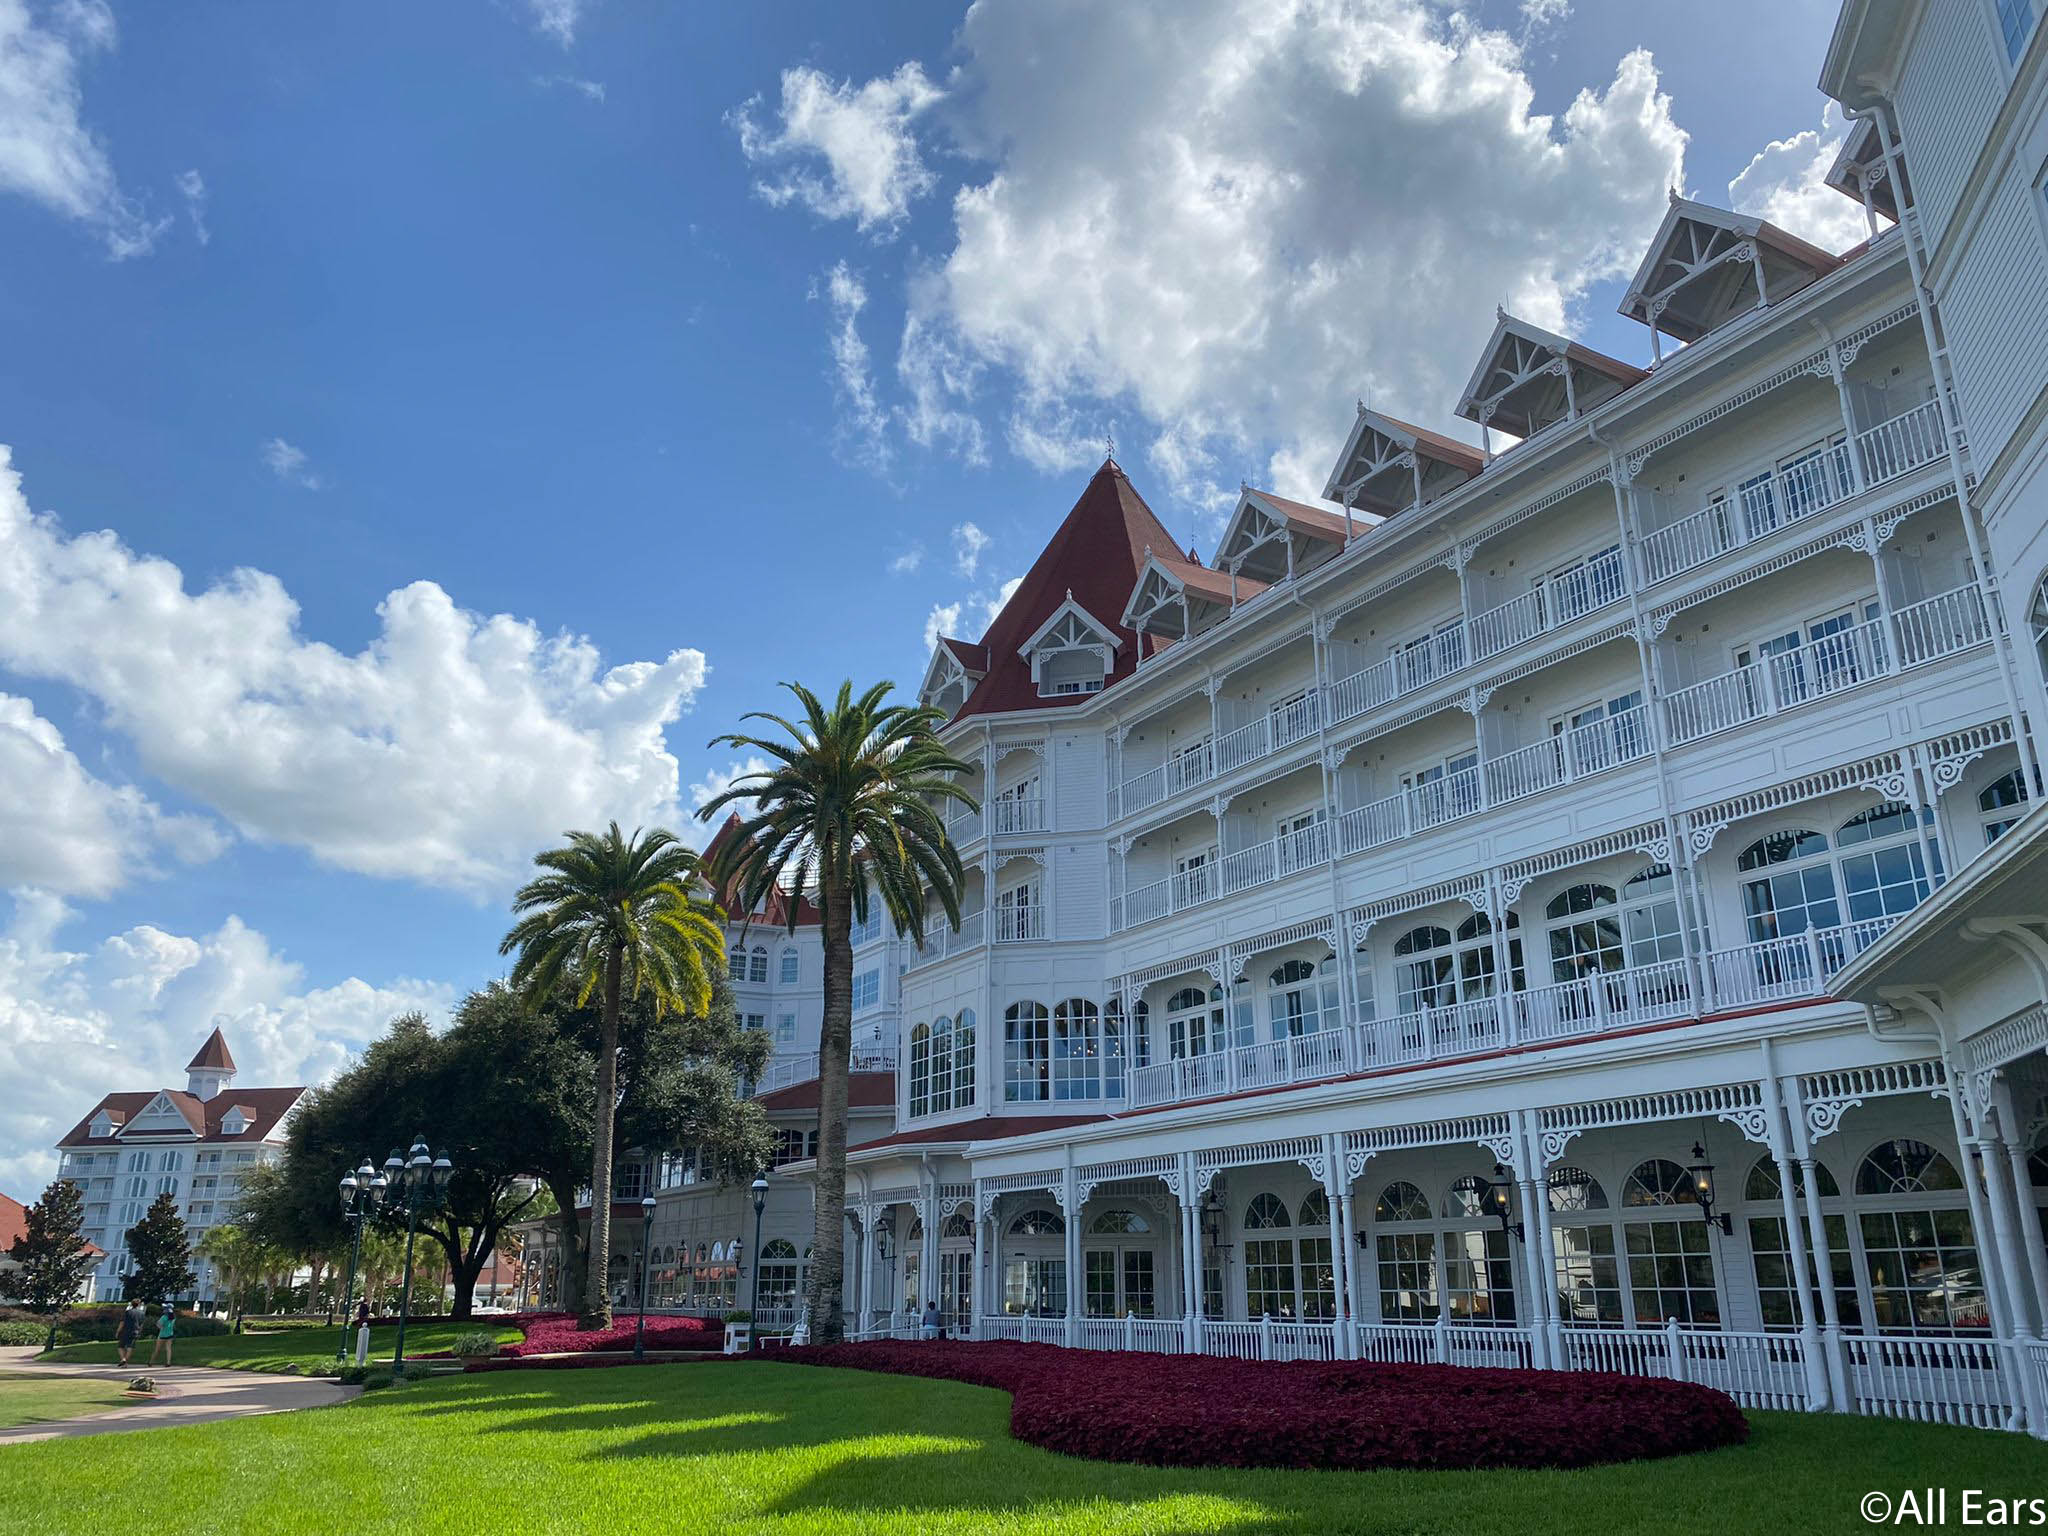 PHOTOS: We Stayed at the Most Expensive Hotel in Walt Disney World